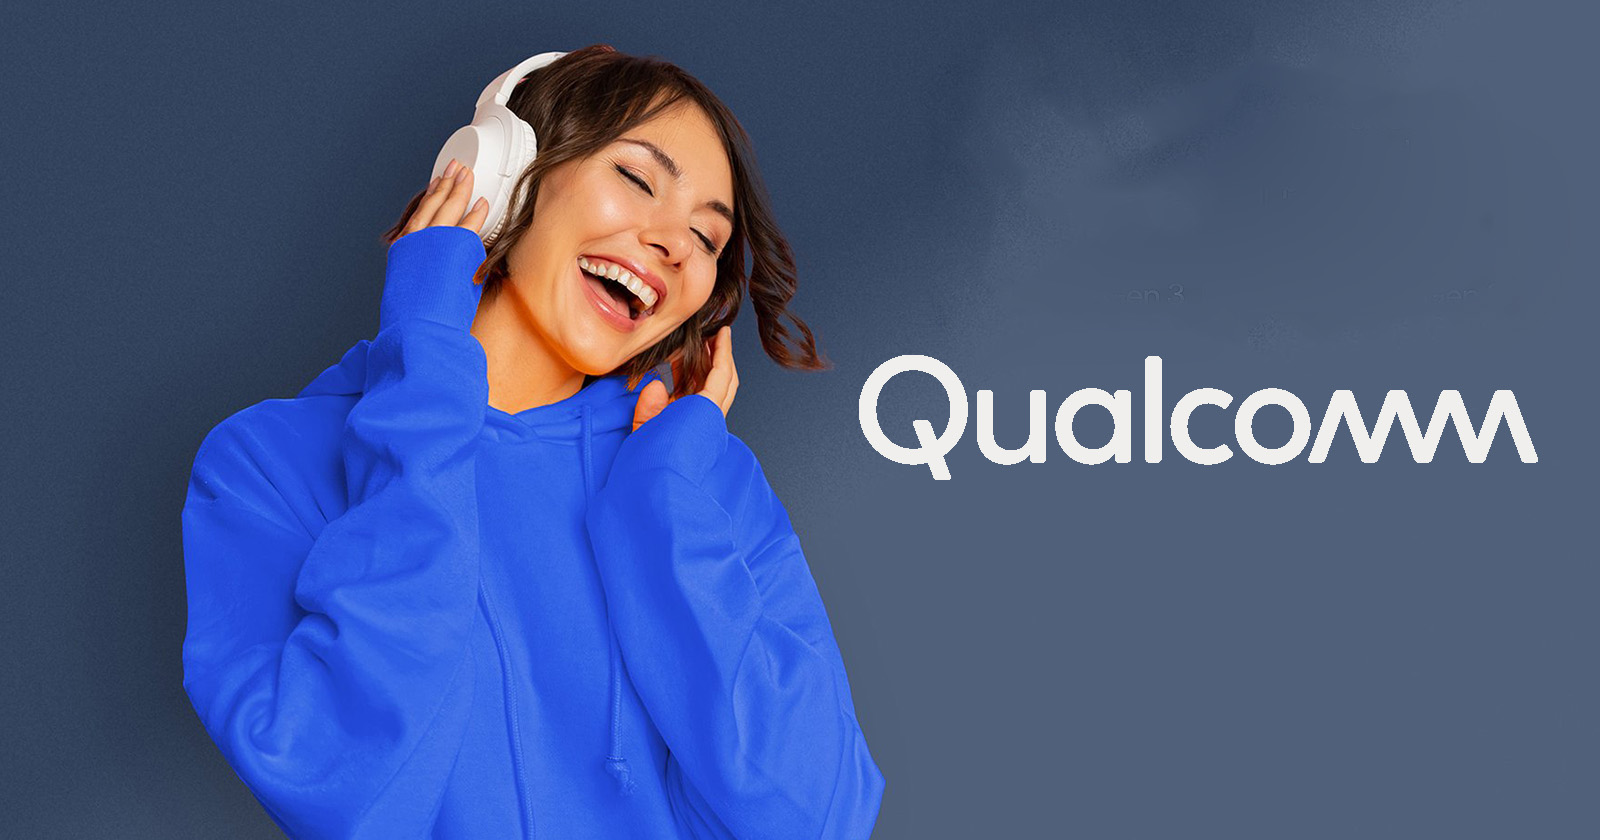 Qualcomm to make affordable headphones sound better